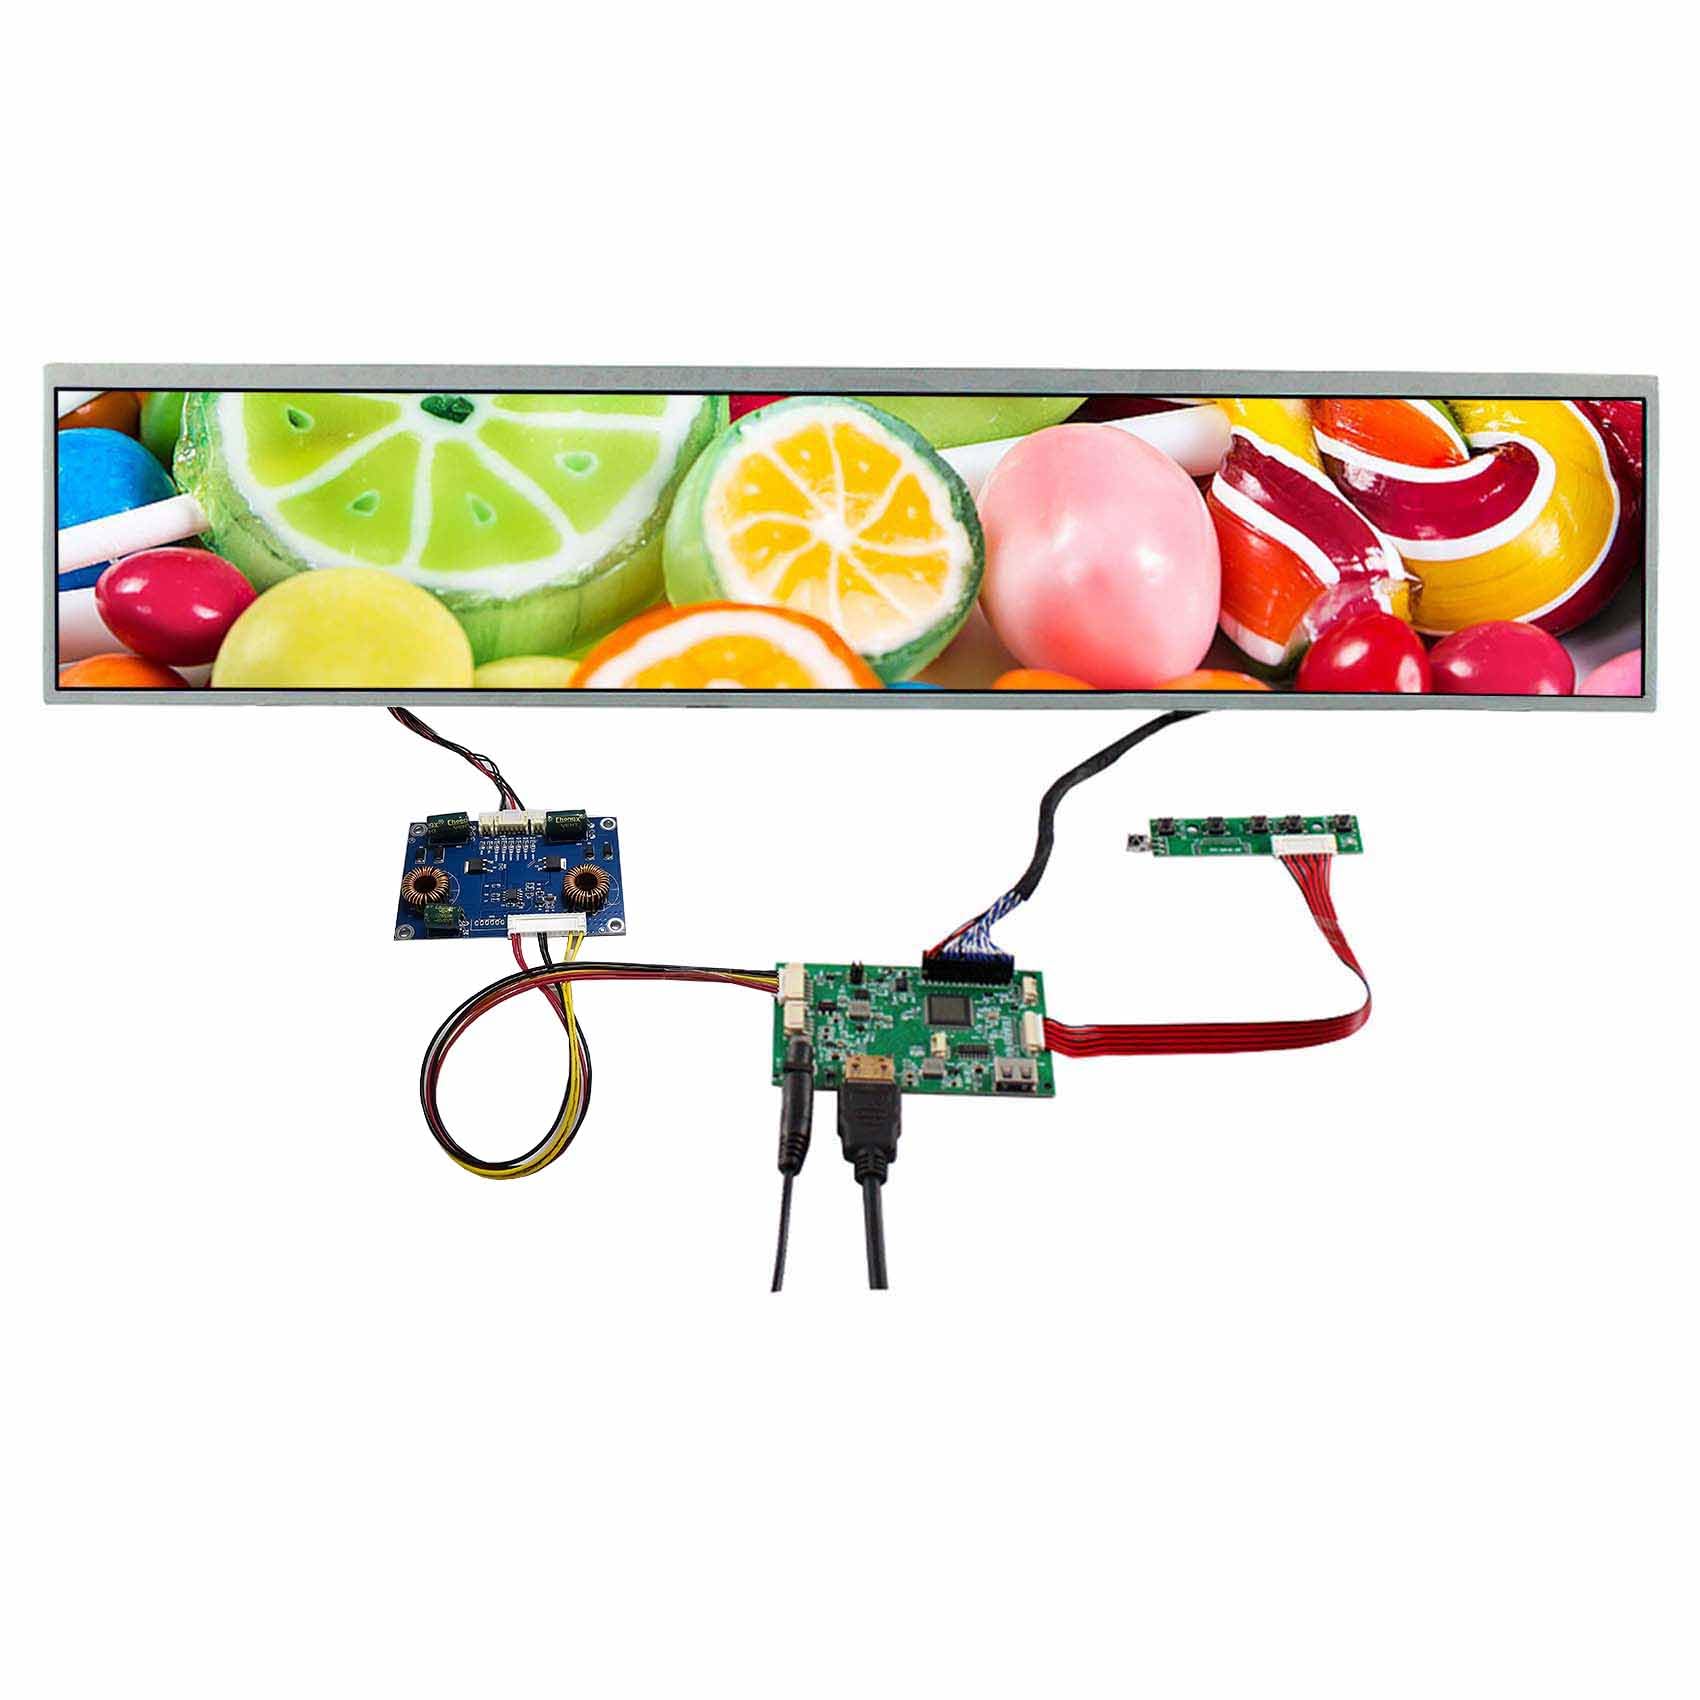 VSDISPLAY 24 Inch 1920x360 Strip Style LCD Screen DV240FBM-NB0 Supports 180 Degree Rotate Image with HD-MI USB LCD Board,as DIY Extended Display Panel/Topper Monitor for Gaming Cabinet